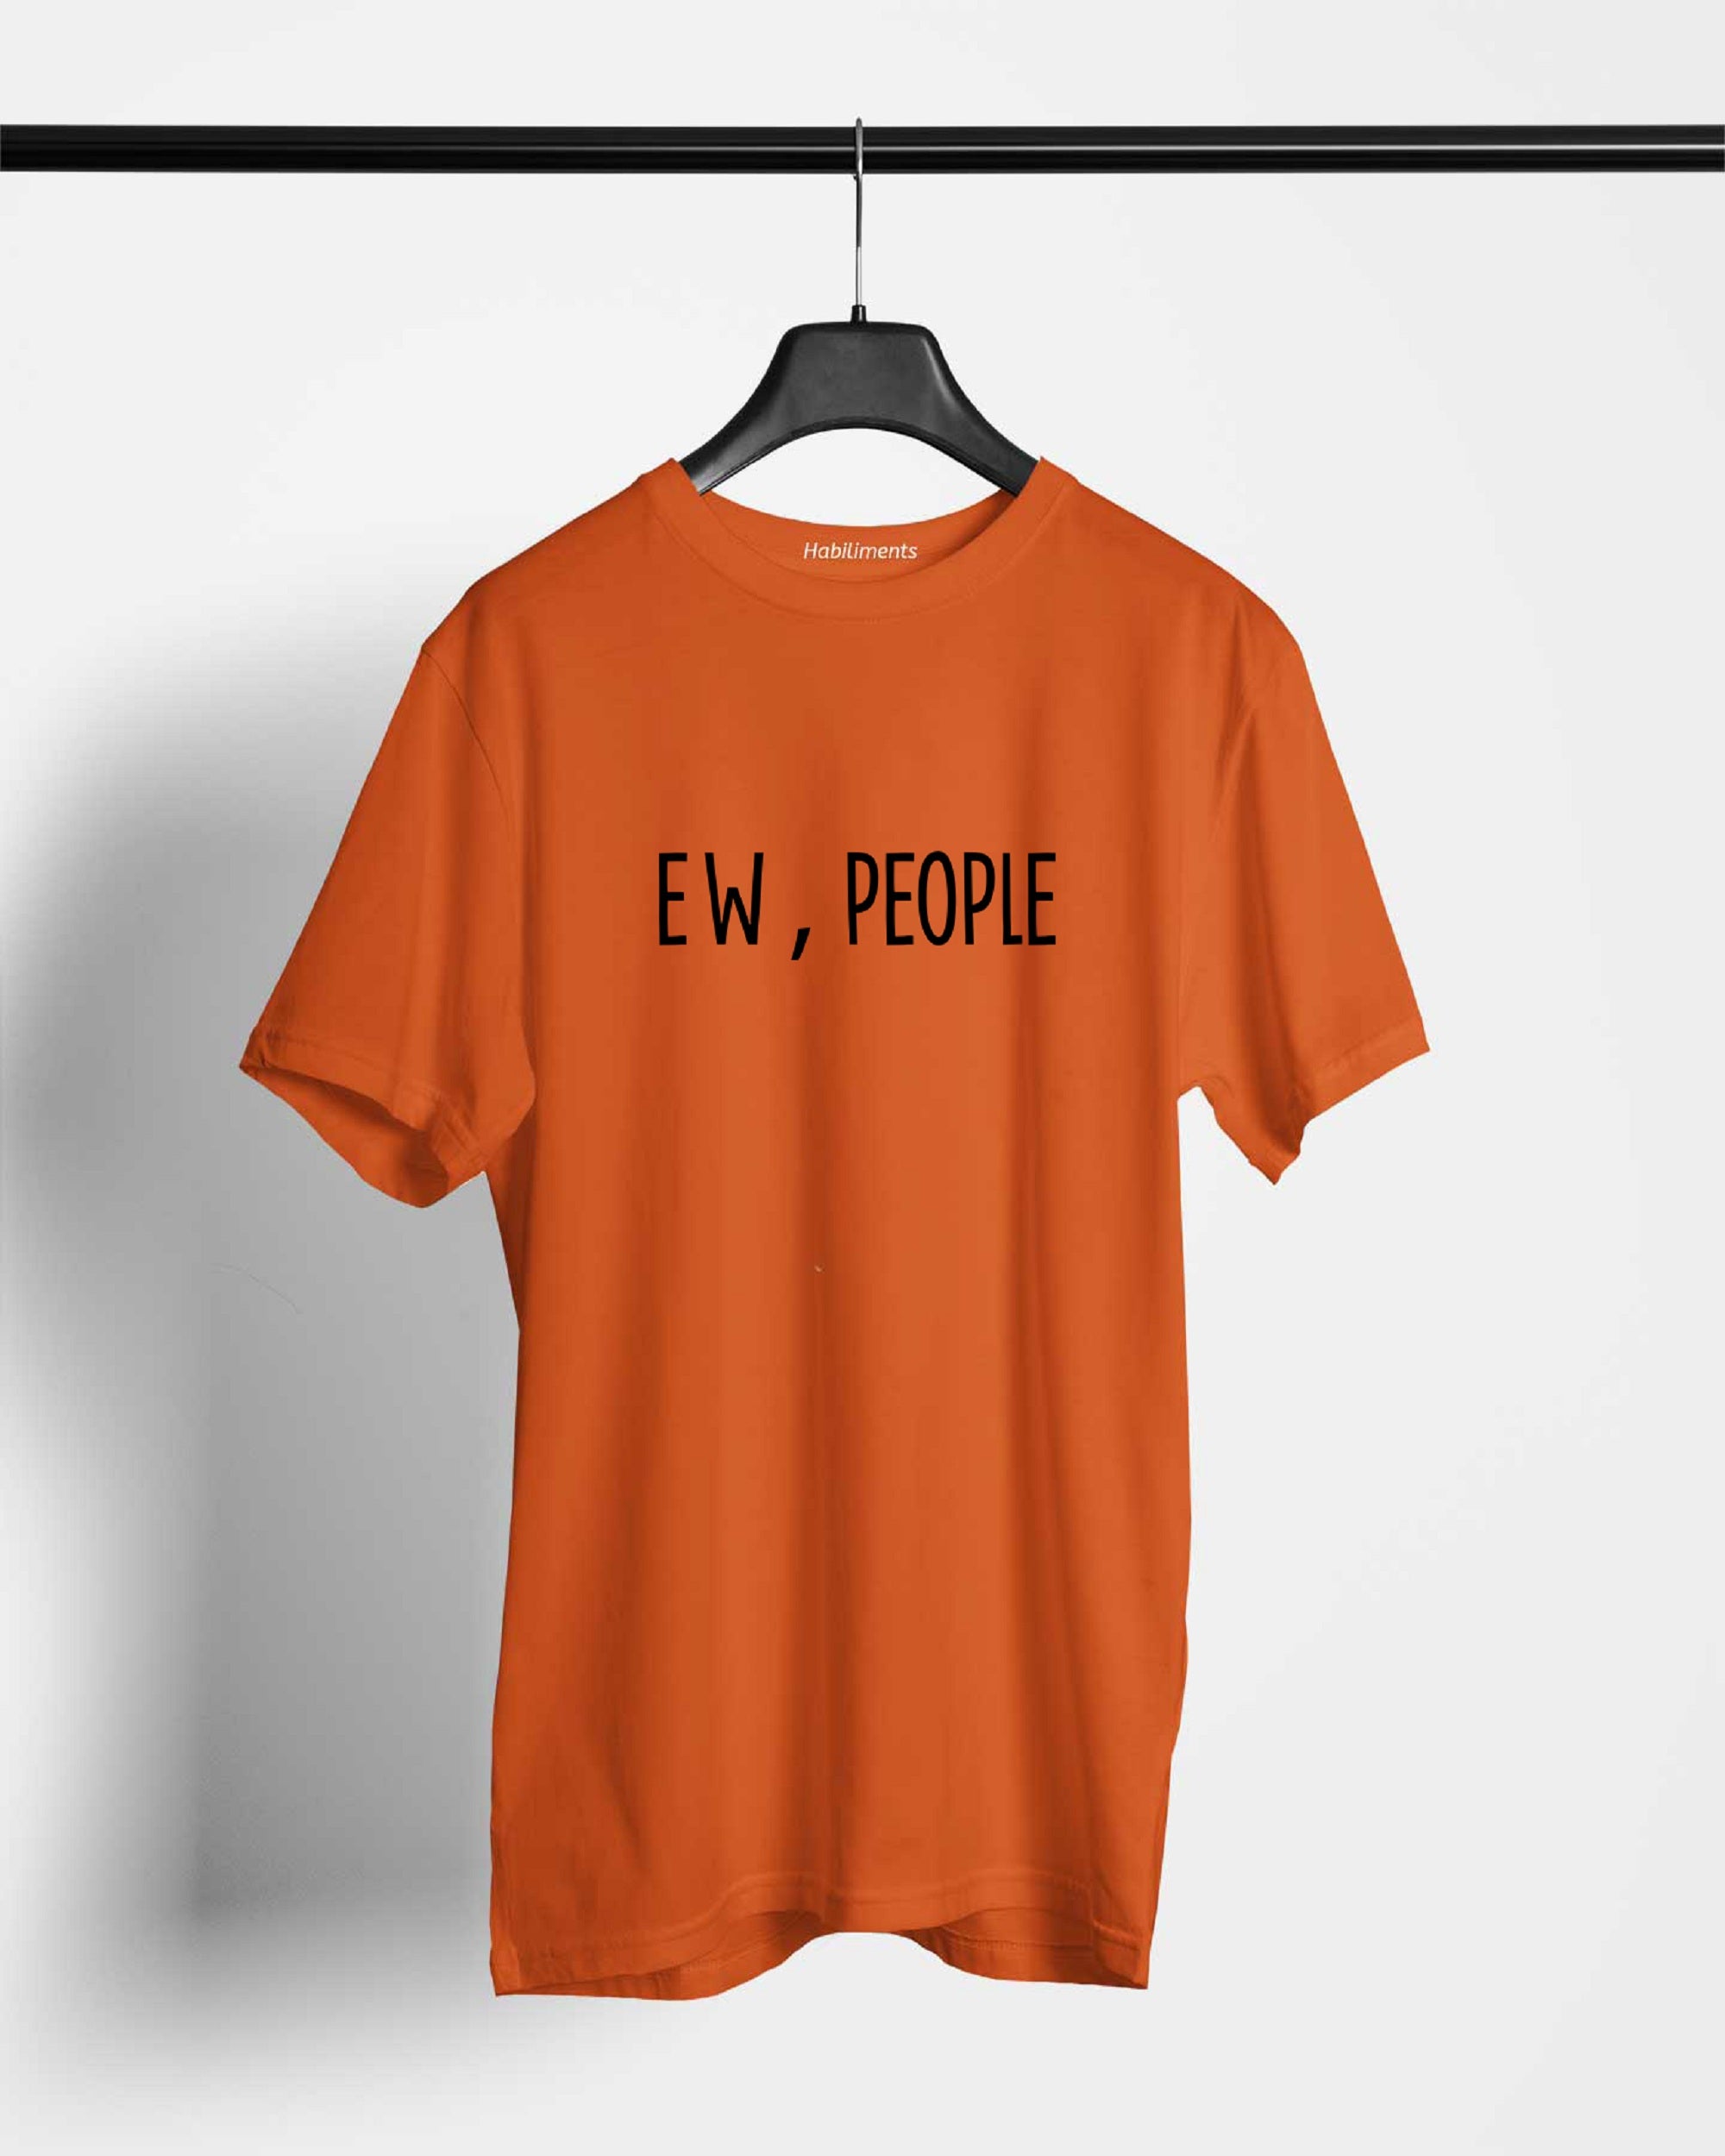 EW,People T-Shirts For Men || Rust || Stylish Tshirts || 100% Cotton || Best T-Shirt For Men's